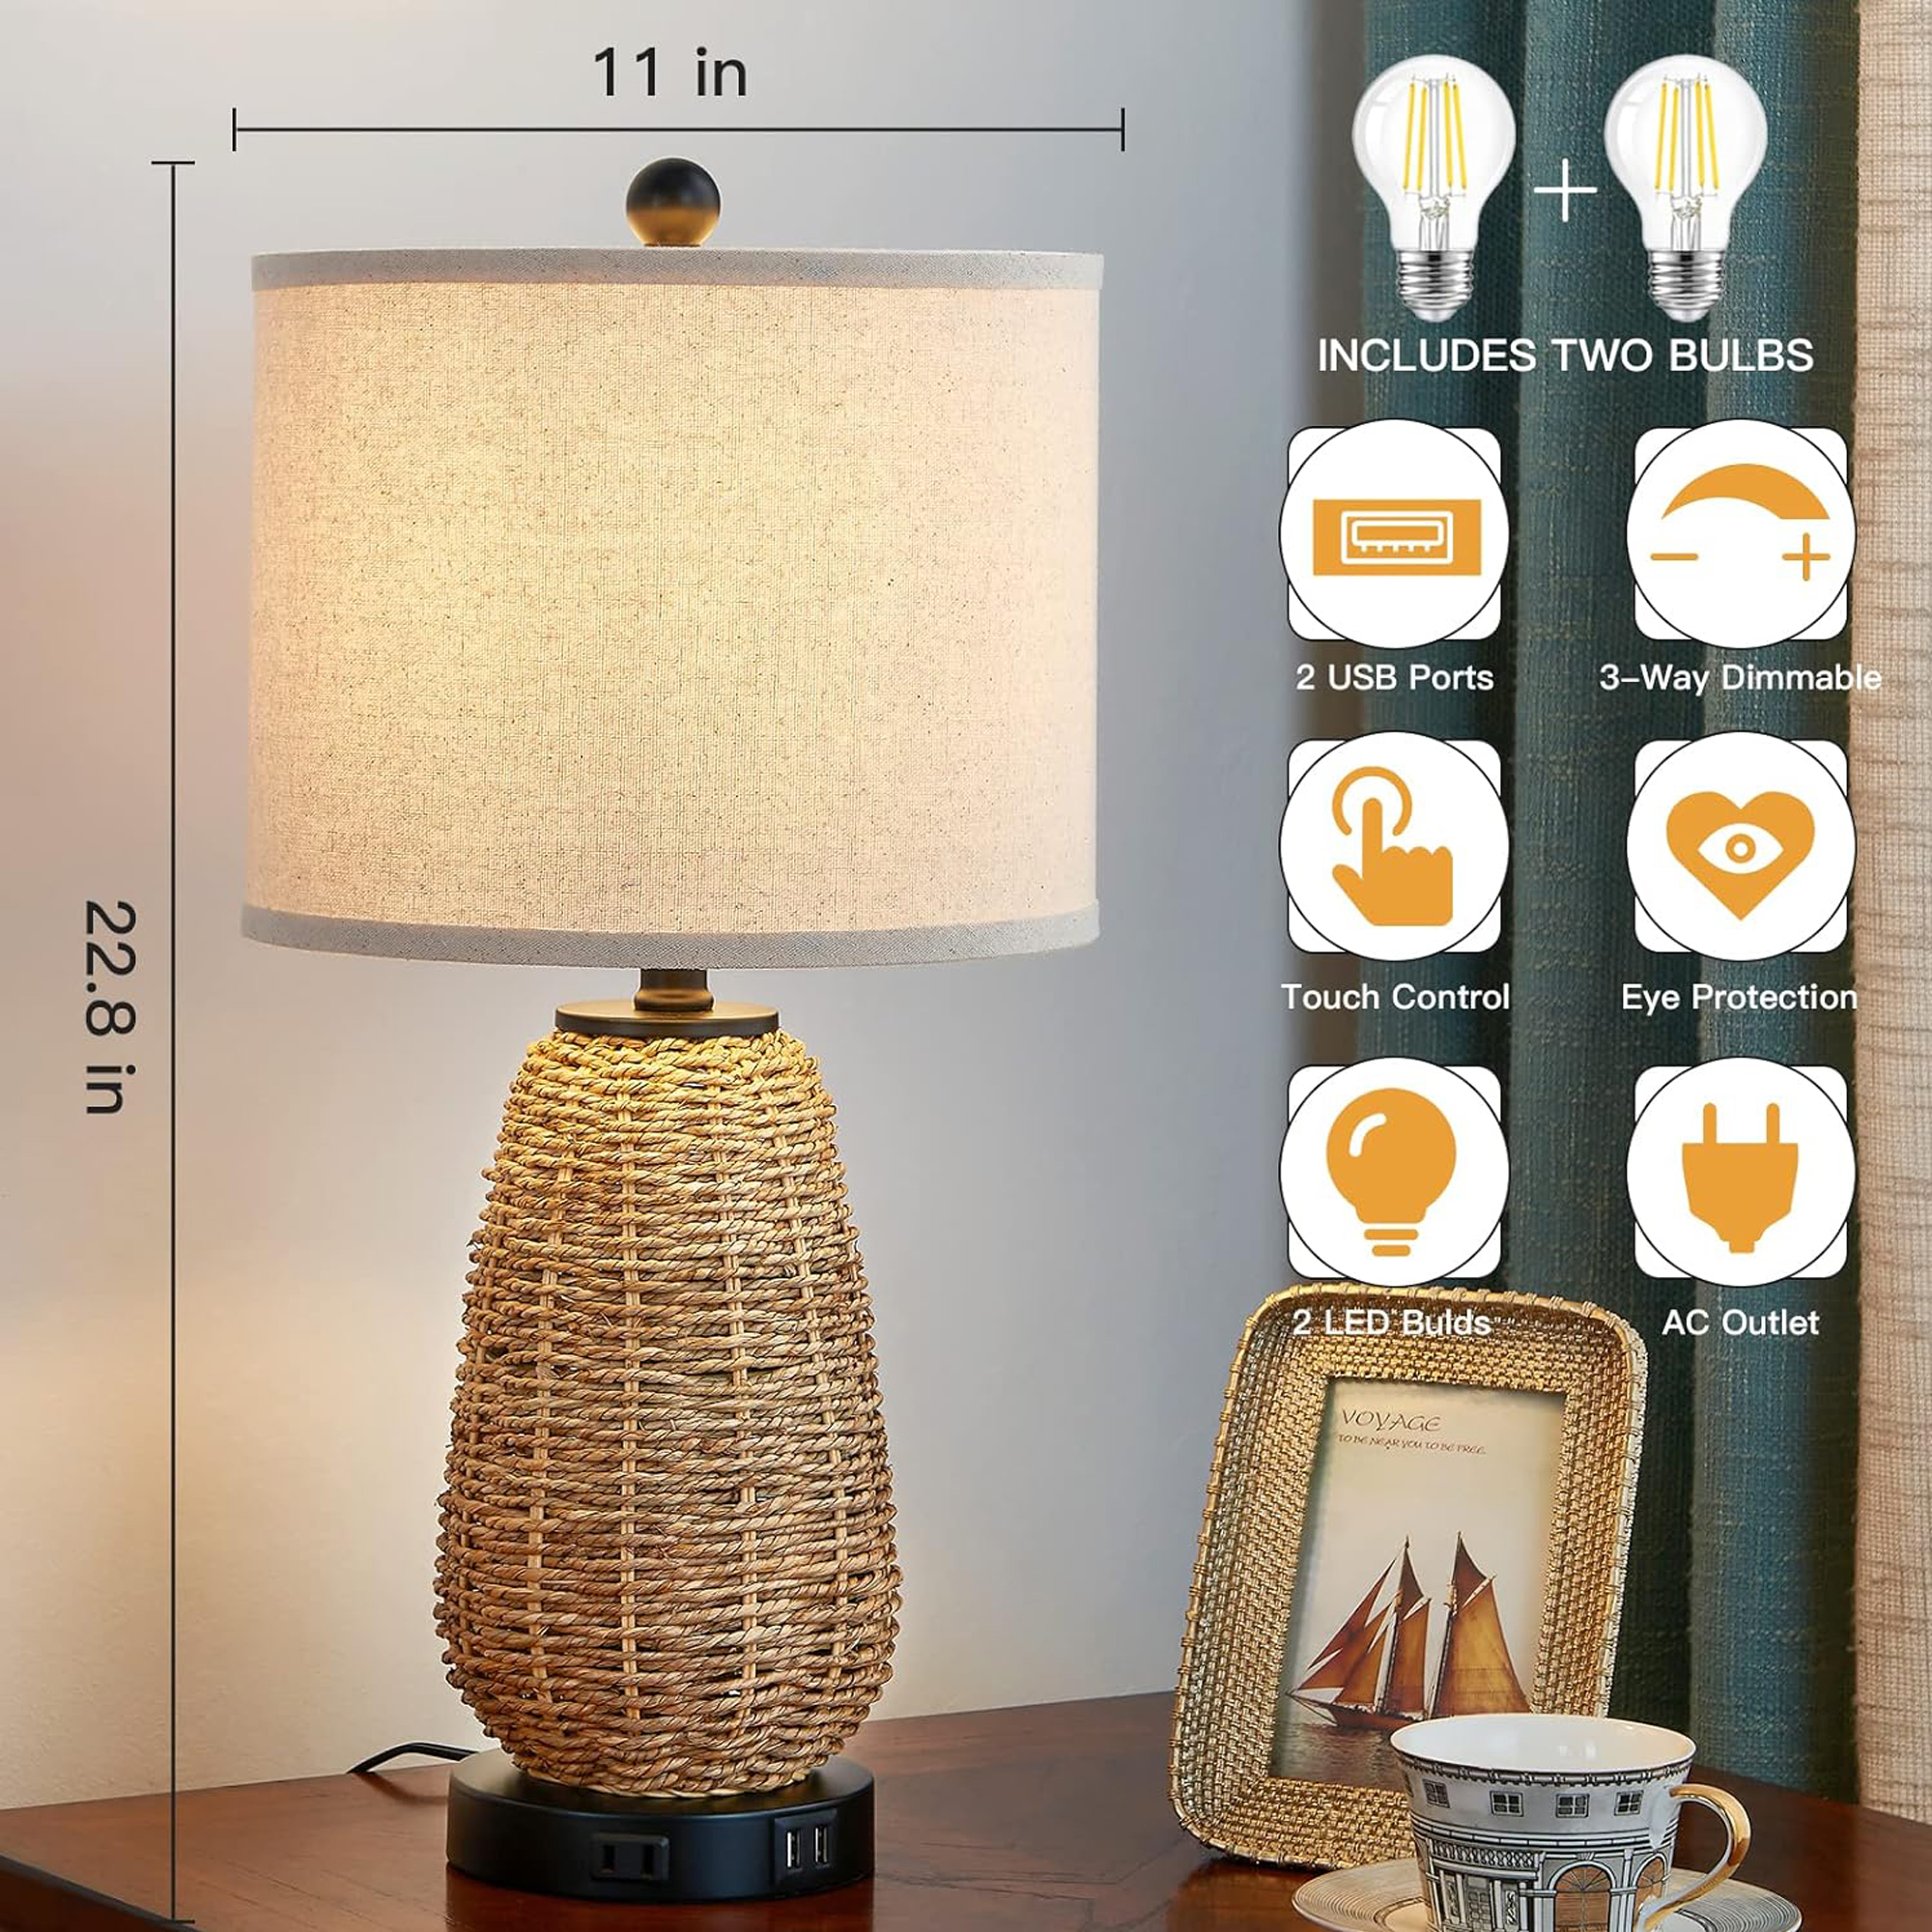 Cinkeda 3 Way Dimmable Touch Control Table Lamps Set of 2 for Living Room Bedroom Farmhouse Oatmeal Braided Rattan Bedside Nightstand Lamp with USB Ports AC Outlet(2 Bulb) - image 4 of 8